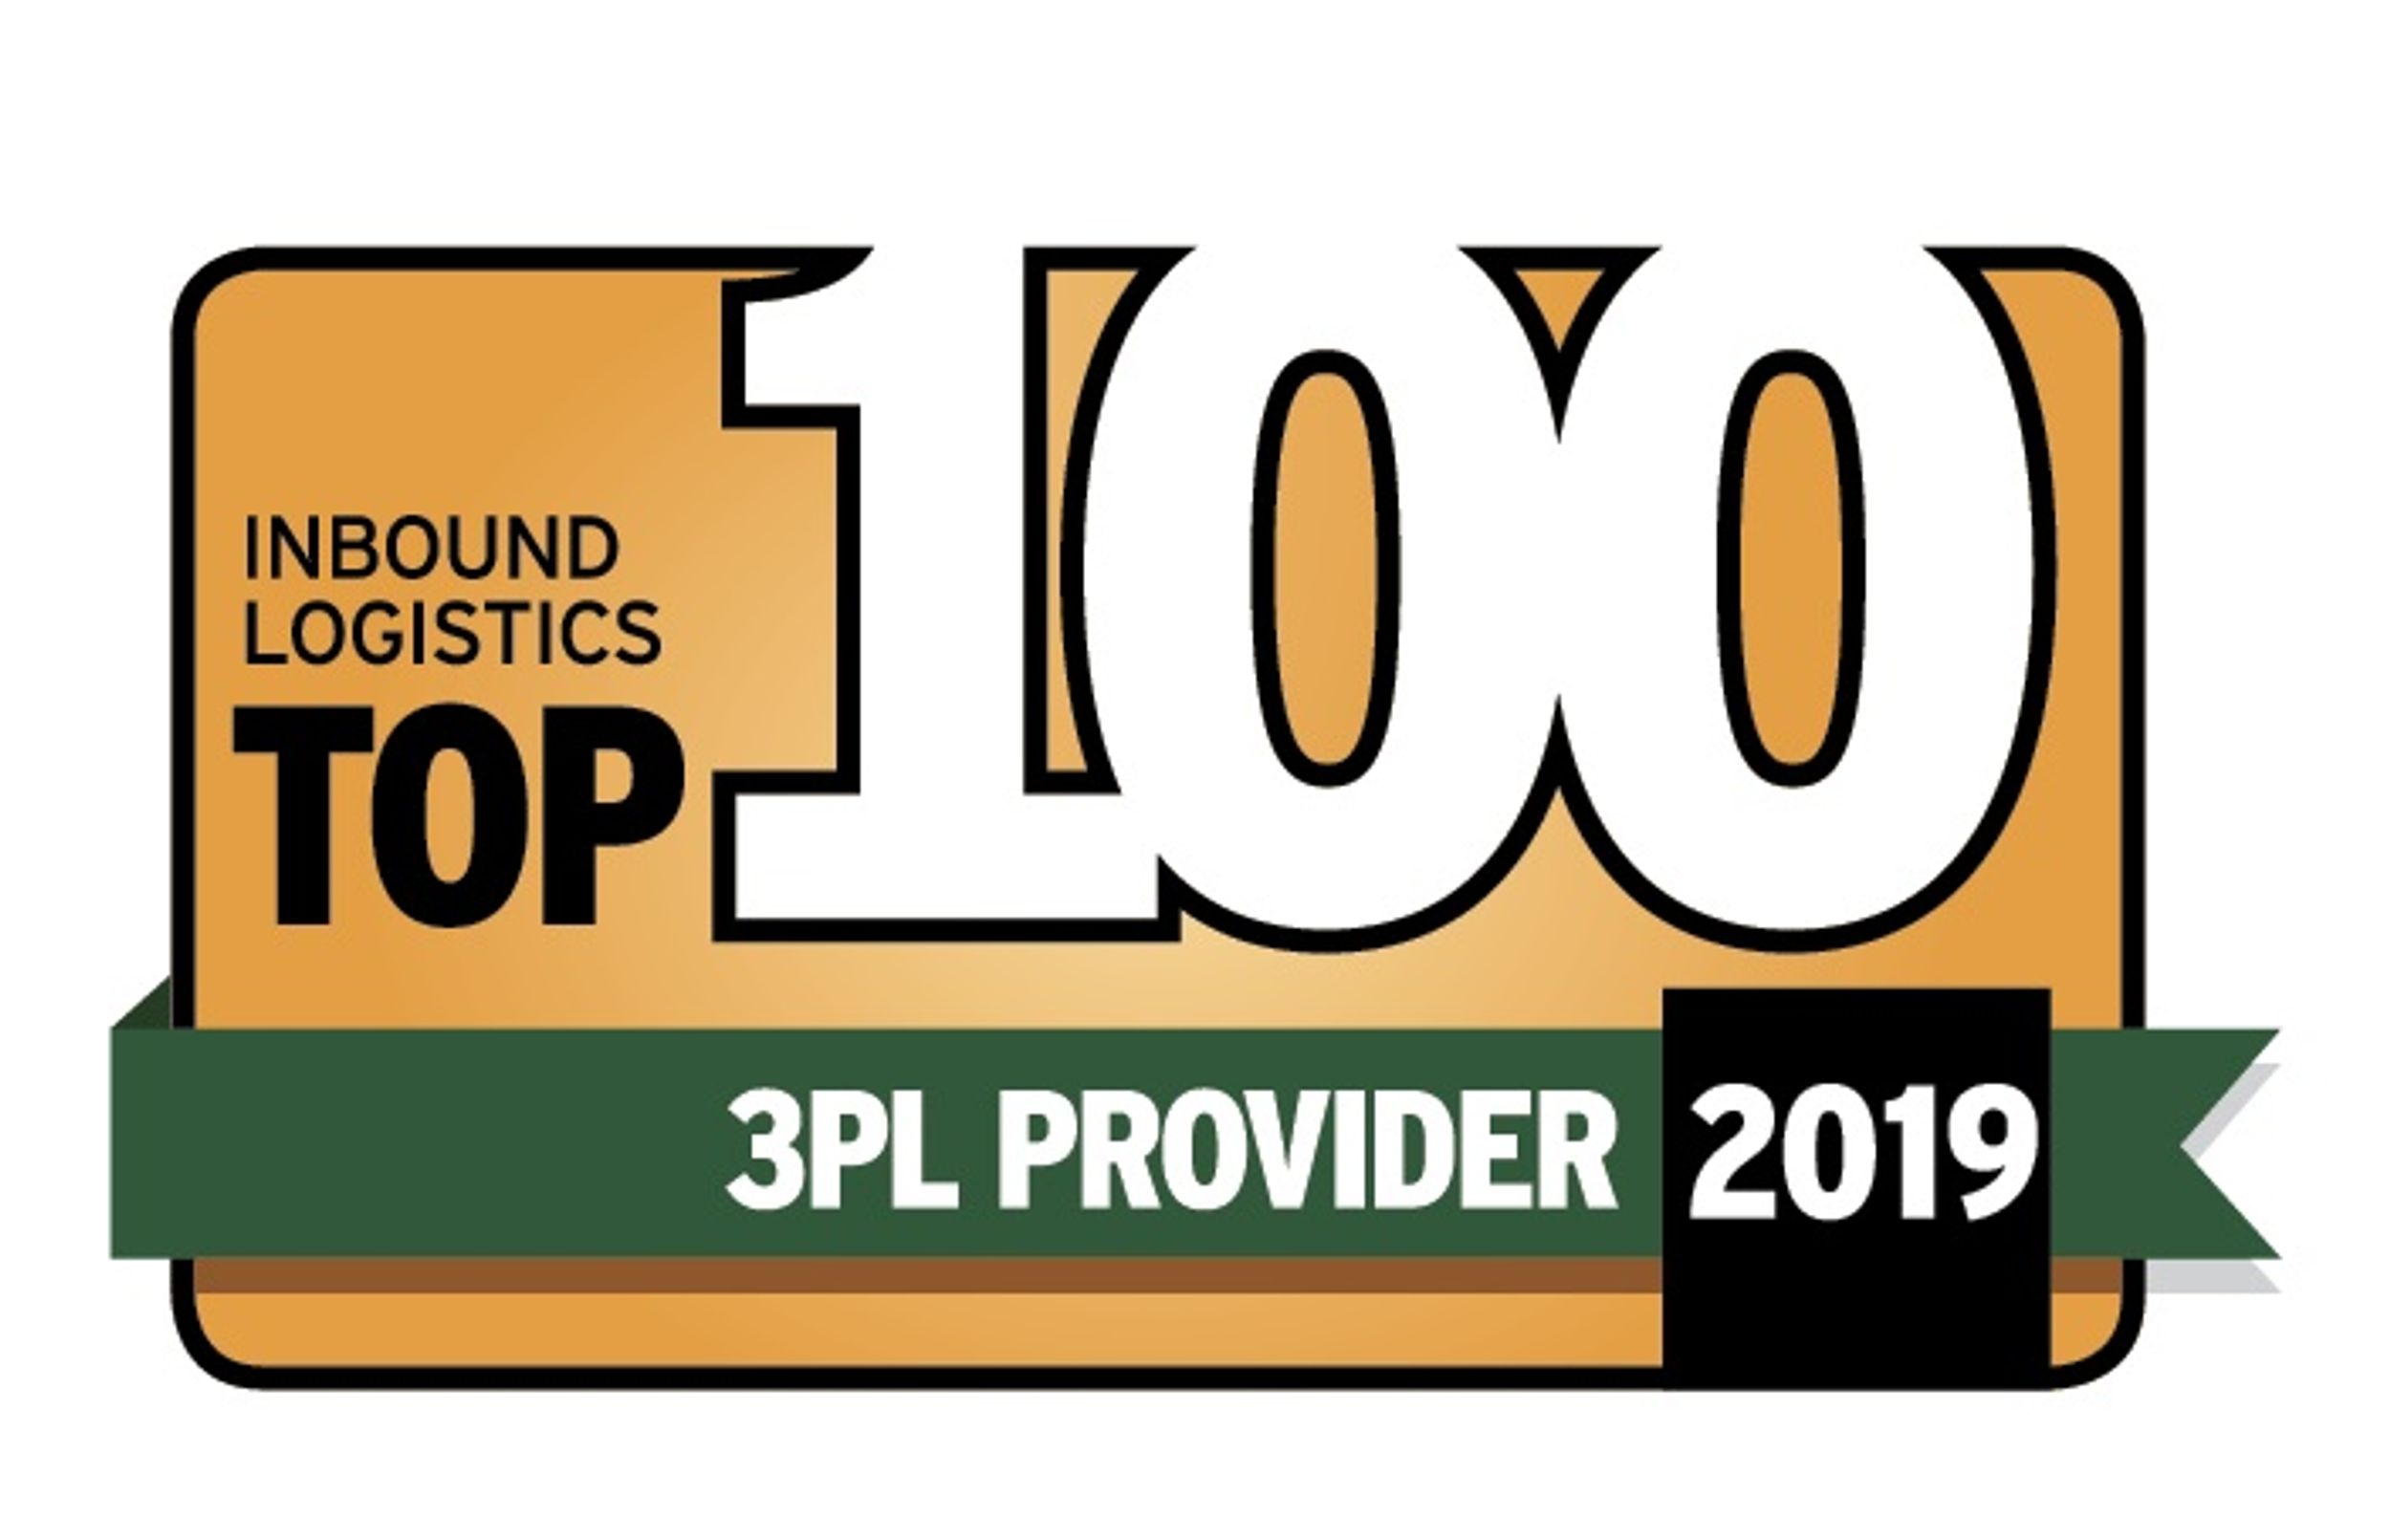 Penske Logistics is Once Again Voted a Top 10 Third-Party Logistics Provider